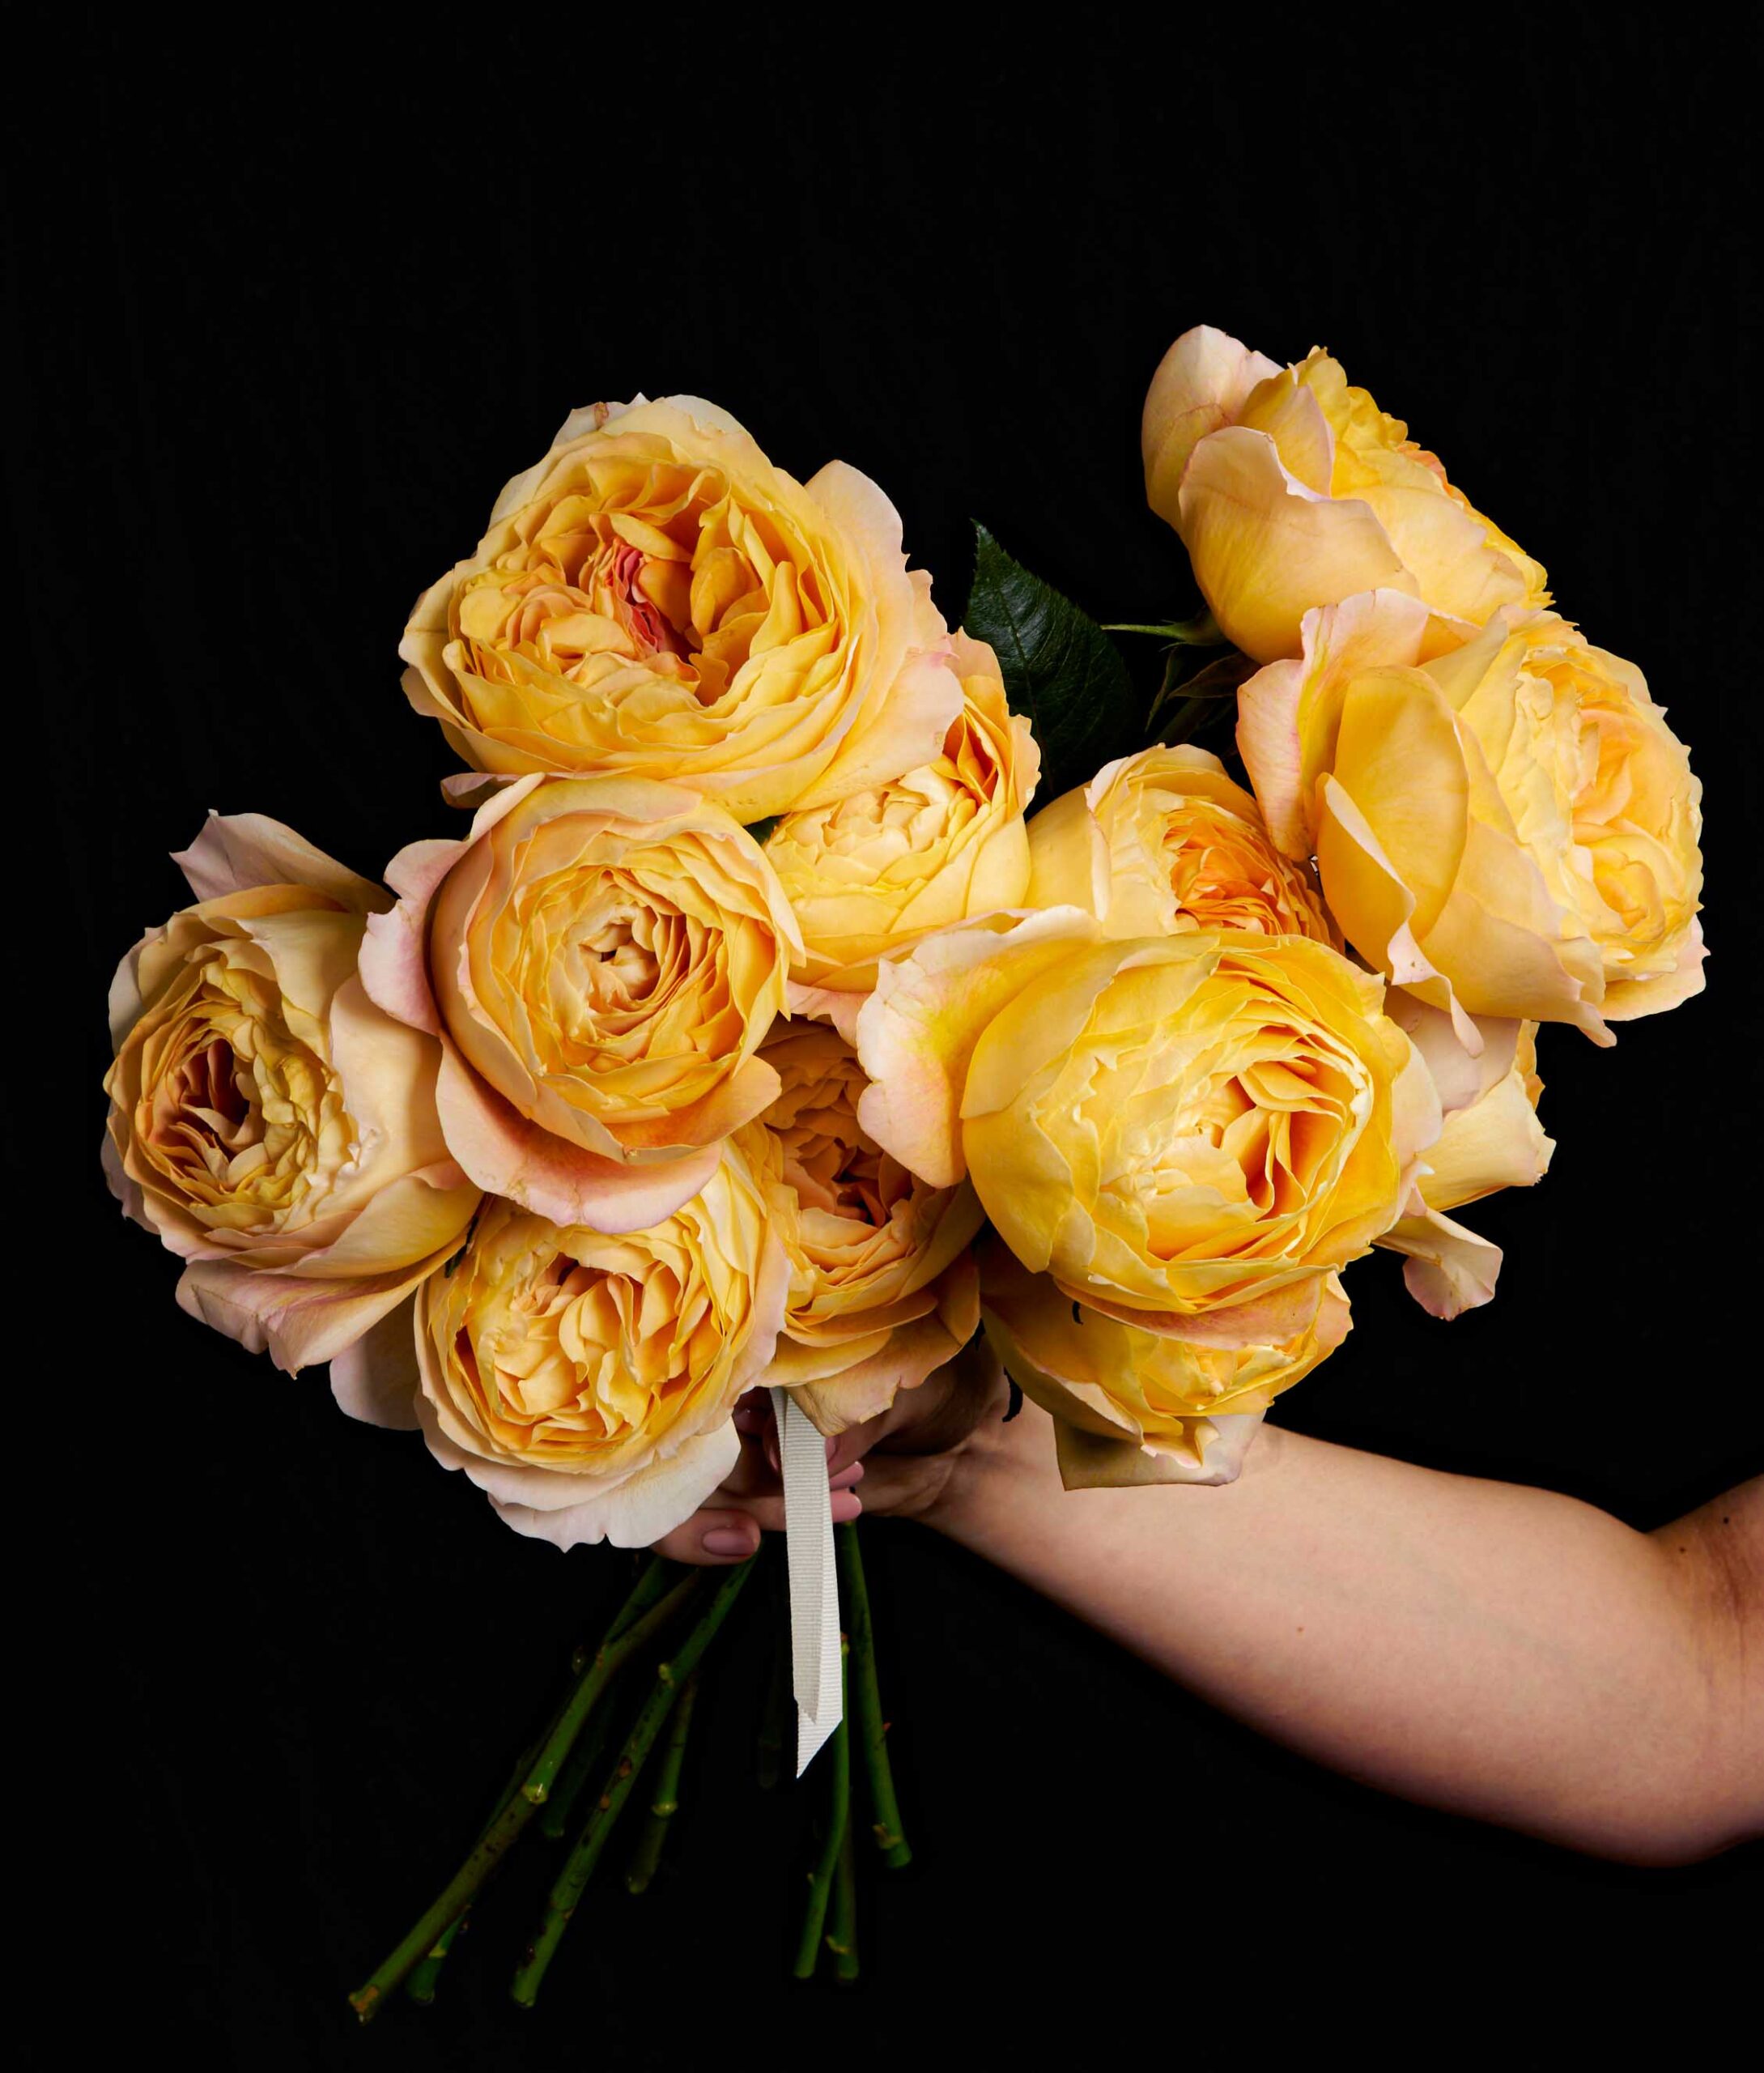 A yellow roses arrangement in a hand